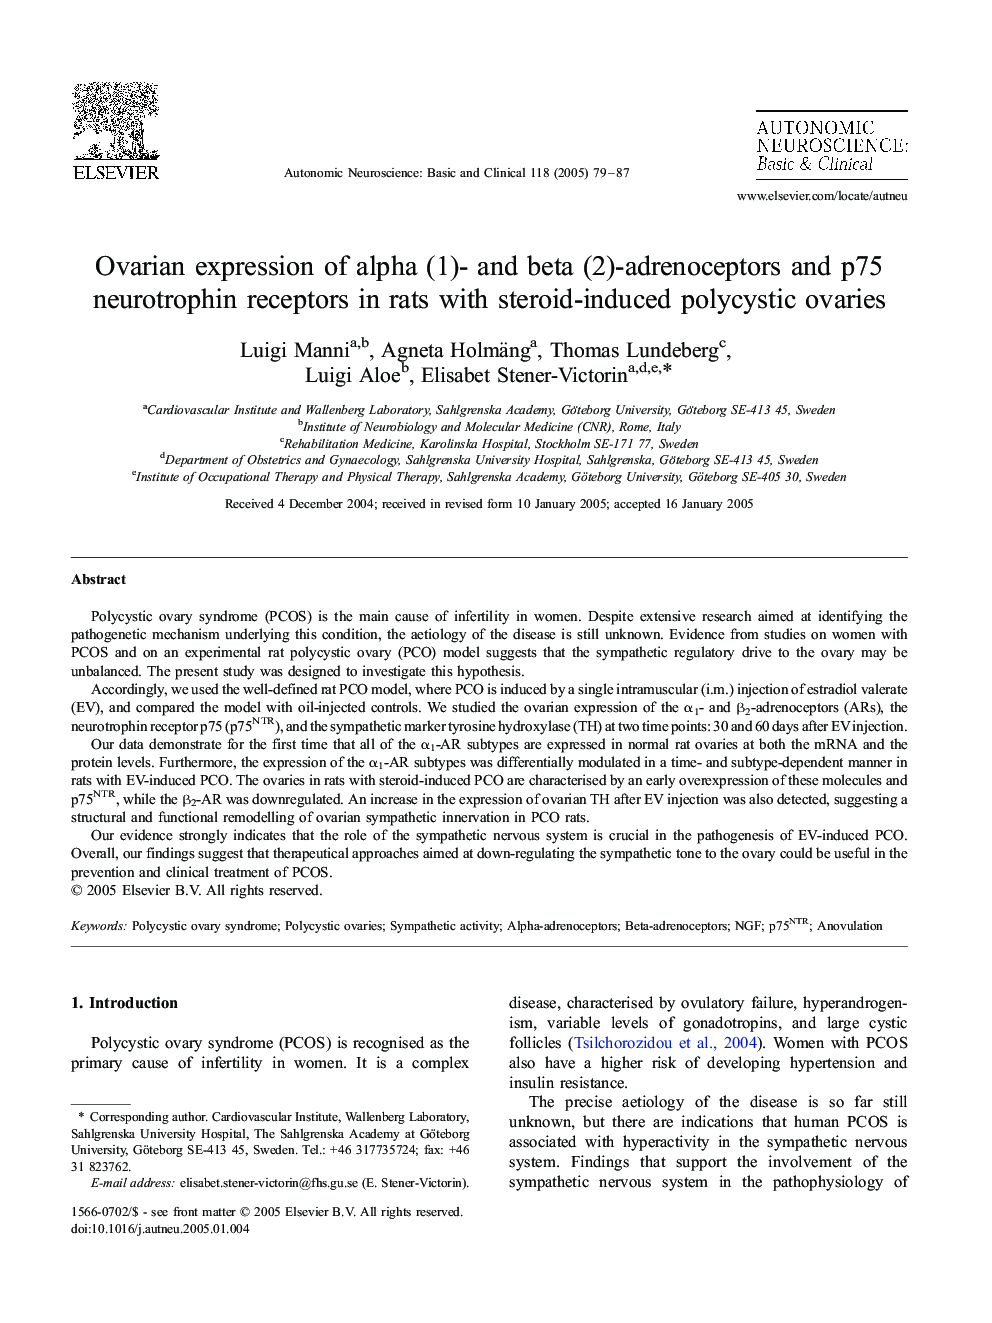 Ovarian expression of alpha (1)- and beta (2)-adrenoceptors and p75 neurotrophin receptors in rats with steroid-induced polycystic ovaries